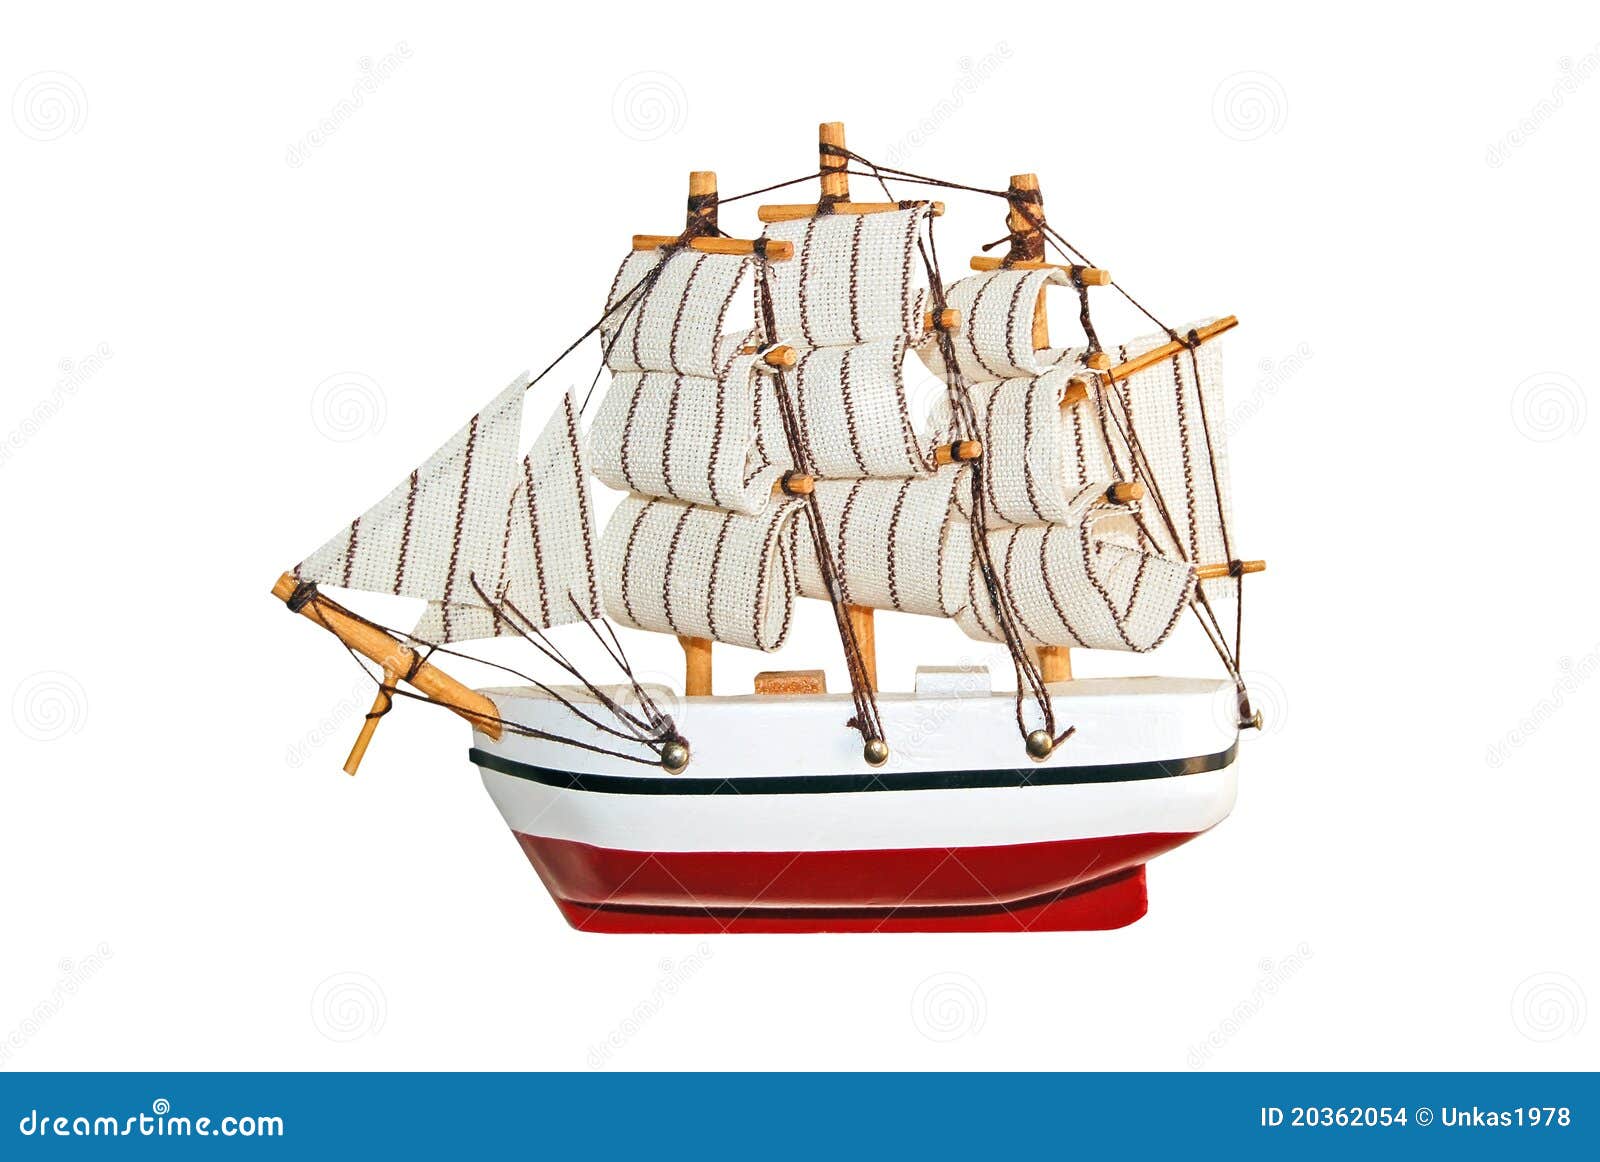 Wooden Ship Toy Model Stock Images Image 20362054